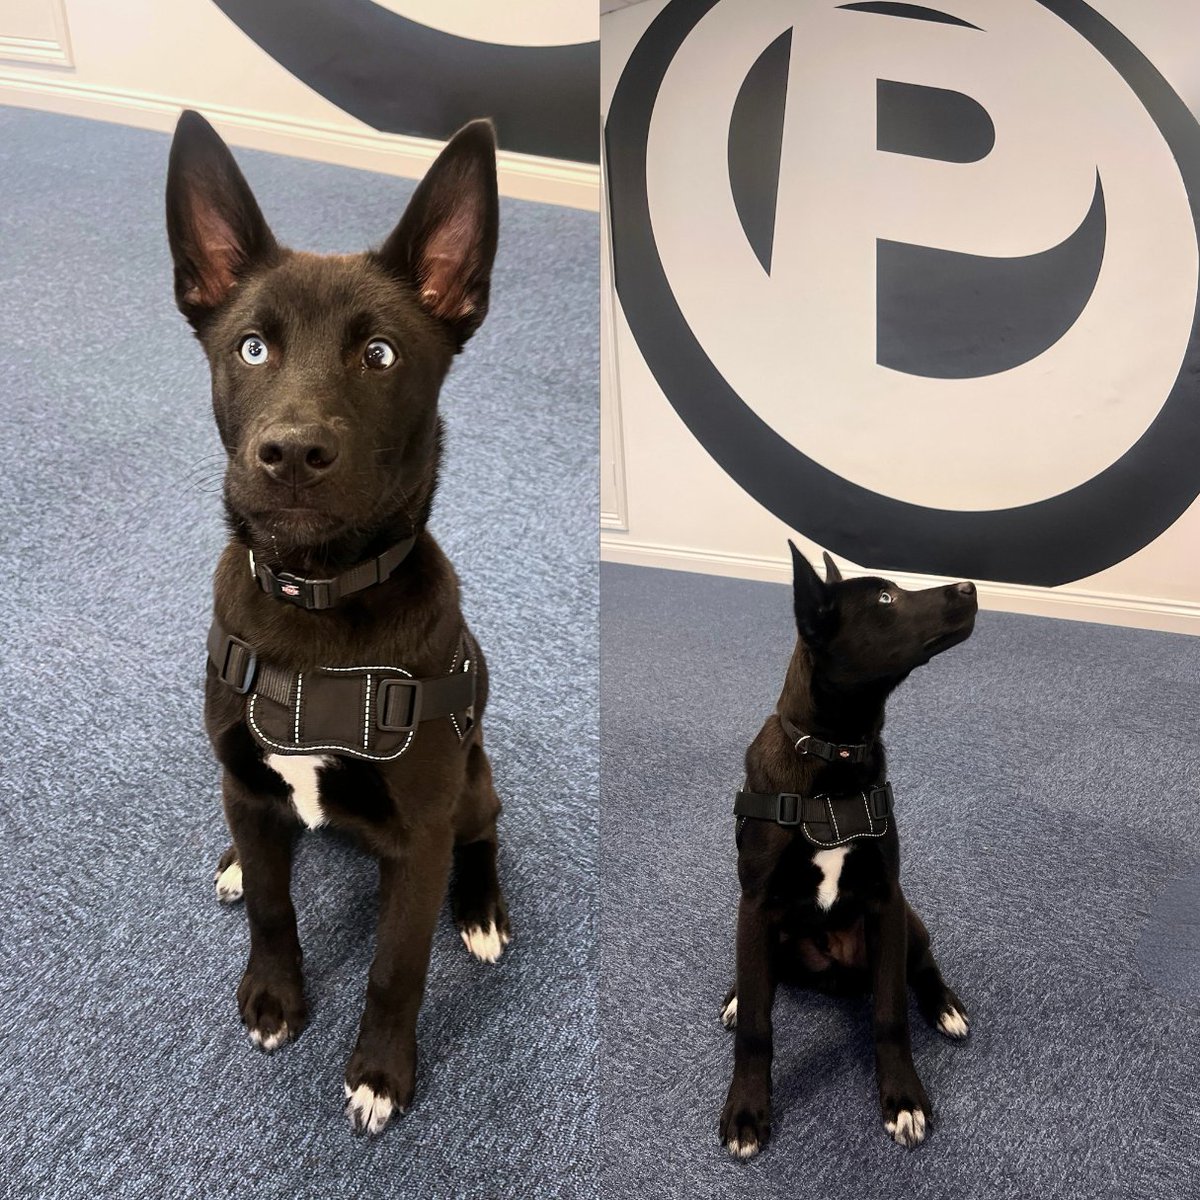 We have been well and truly SPOILED at Purplex HQ recently, and today we met Gunner, account manager Steve's newest addition😭

We love getting to see some of our team's furry friends across @TheAscotGroup - and with those eyes, how could we resist?!😍🐾